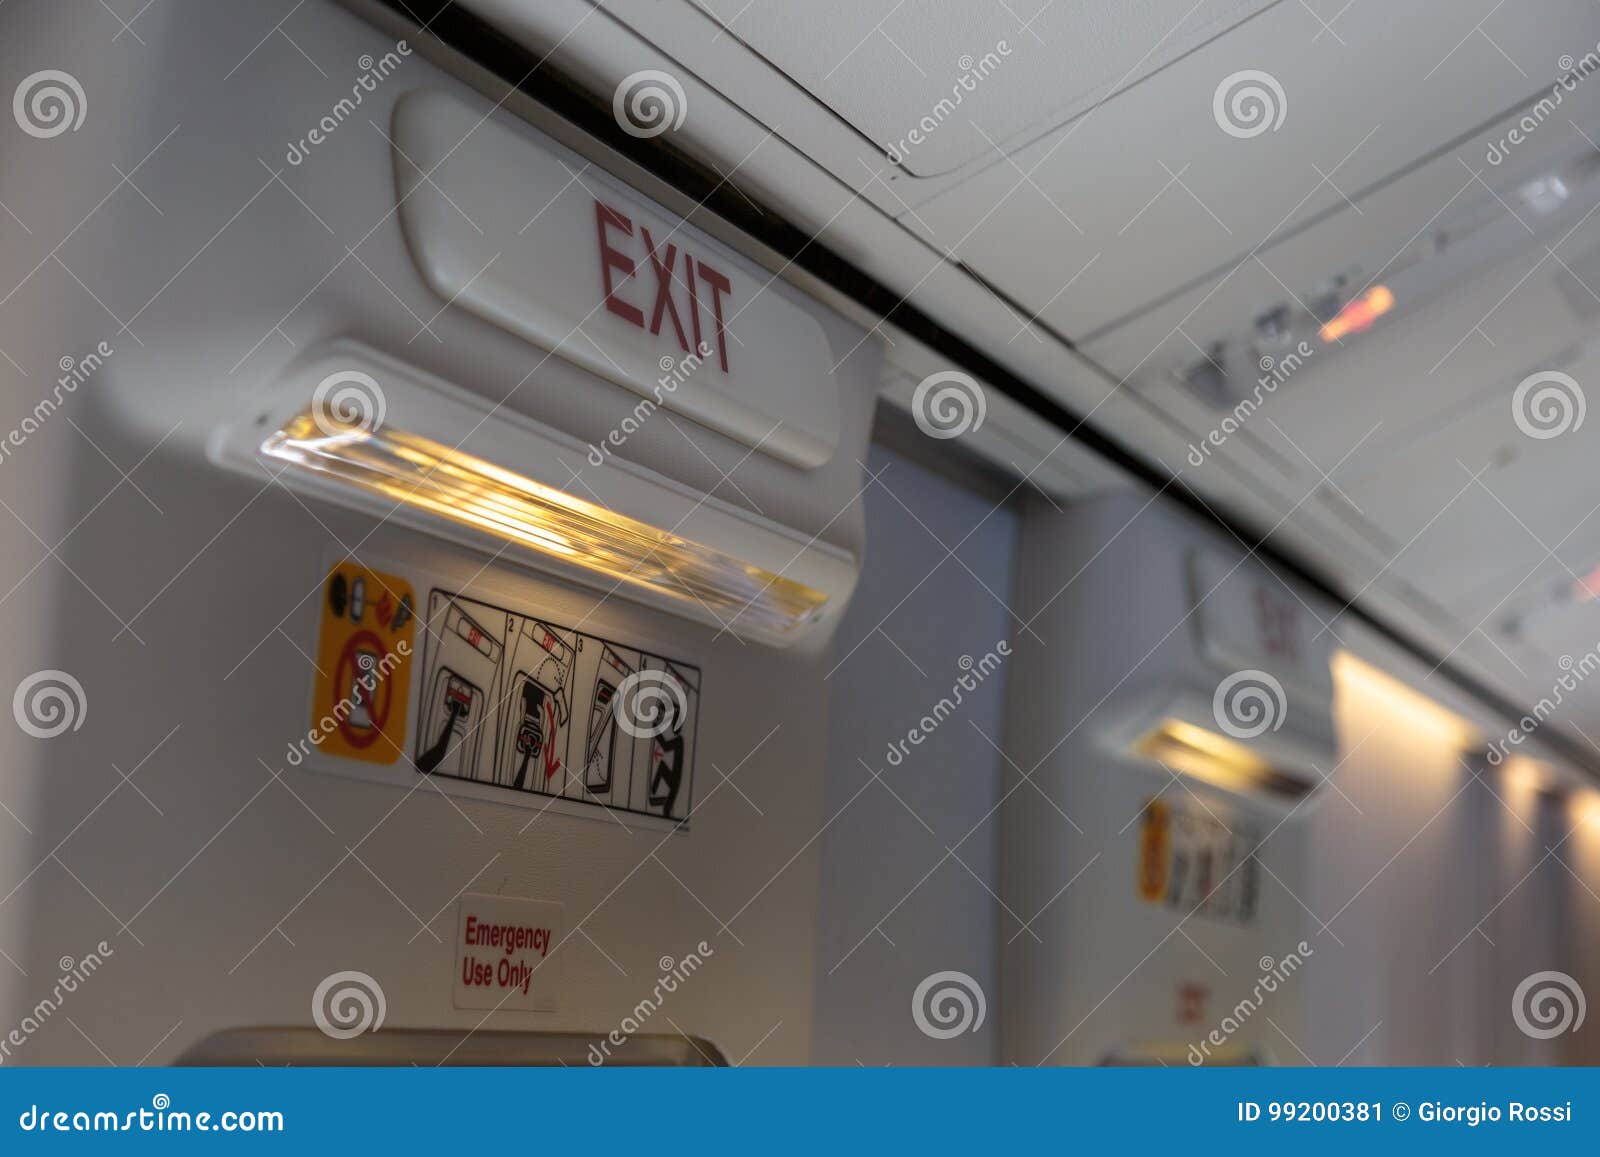 Emergency Exit And Light In Aircraft Cabin Stock Image Image of seating, economy 99200381